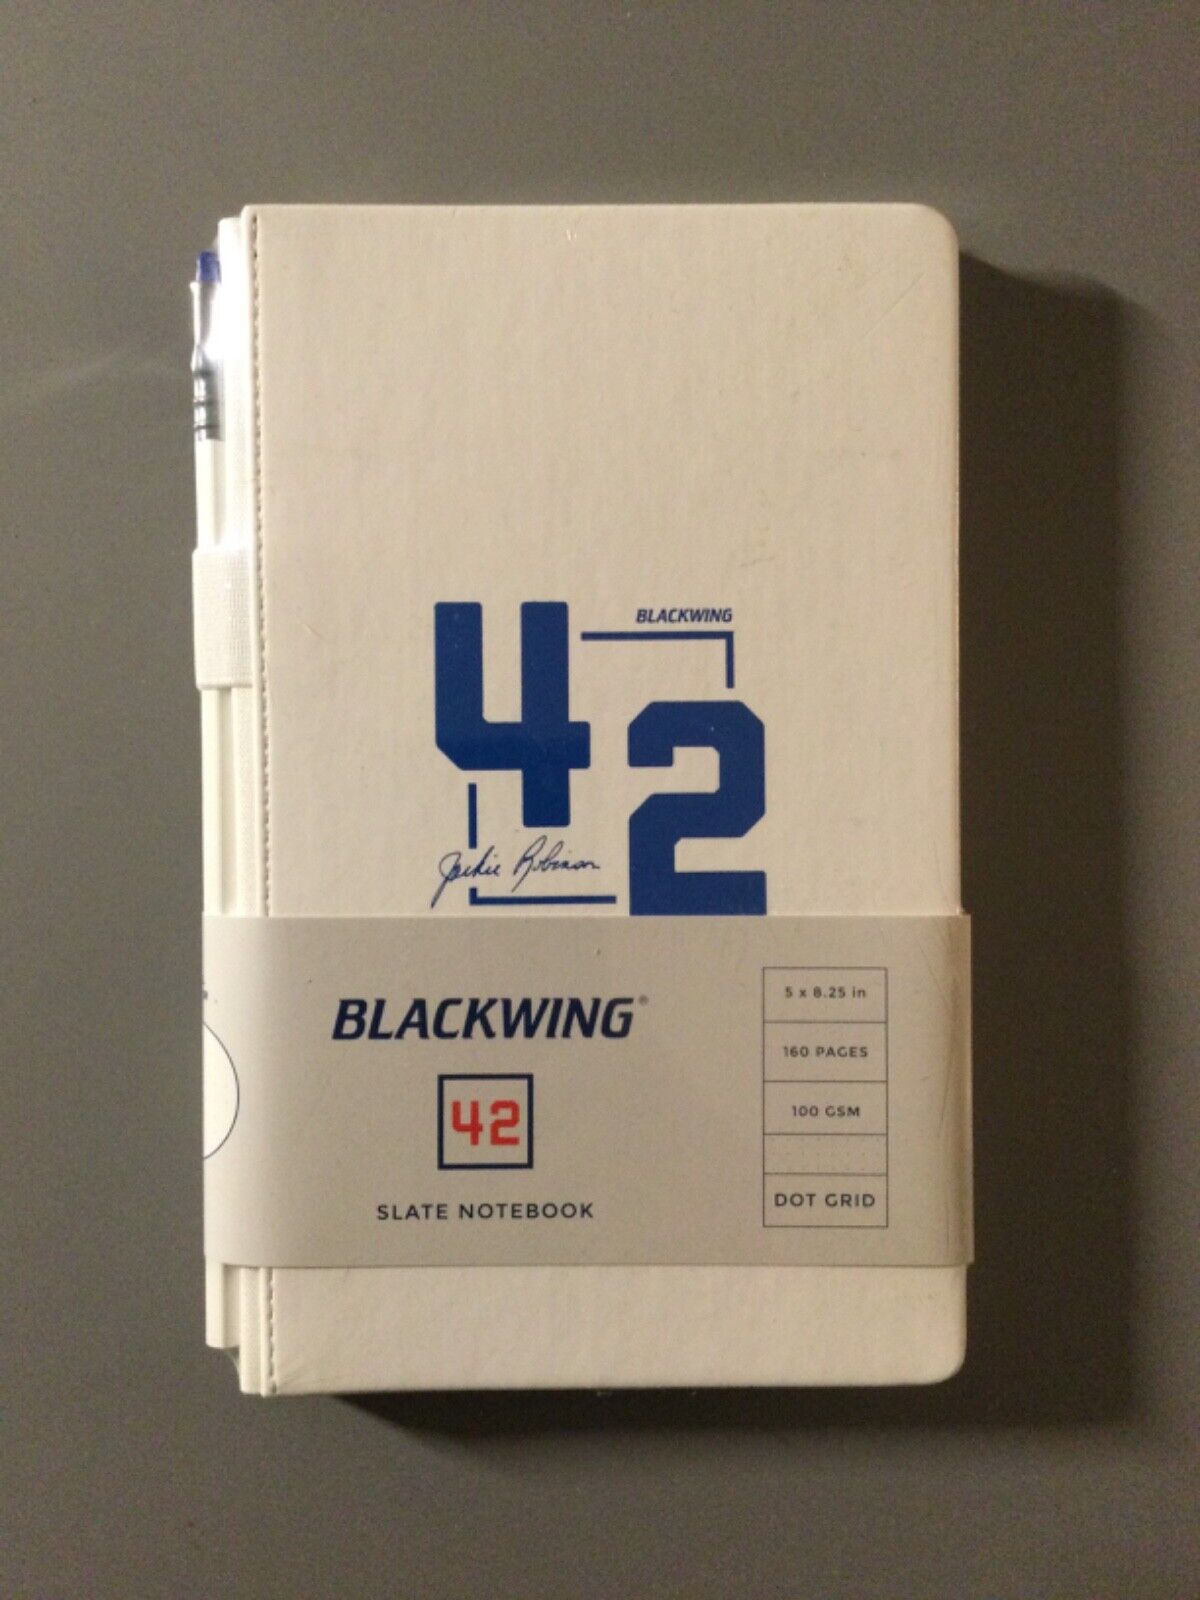 Blackwing Volume 42 Jackie Robinson Slate Notebook and Palomino Pencil-New